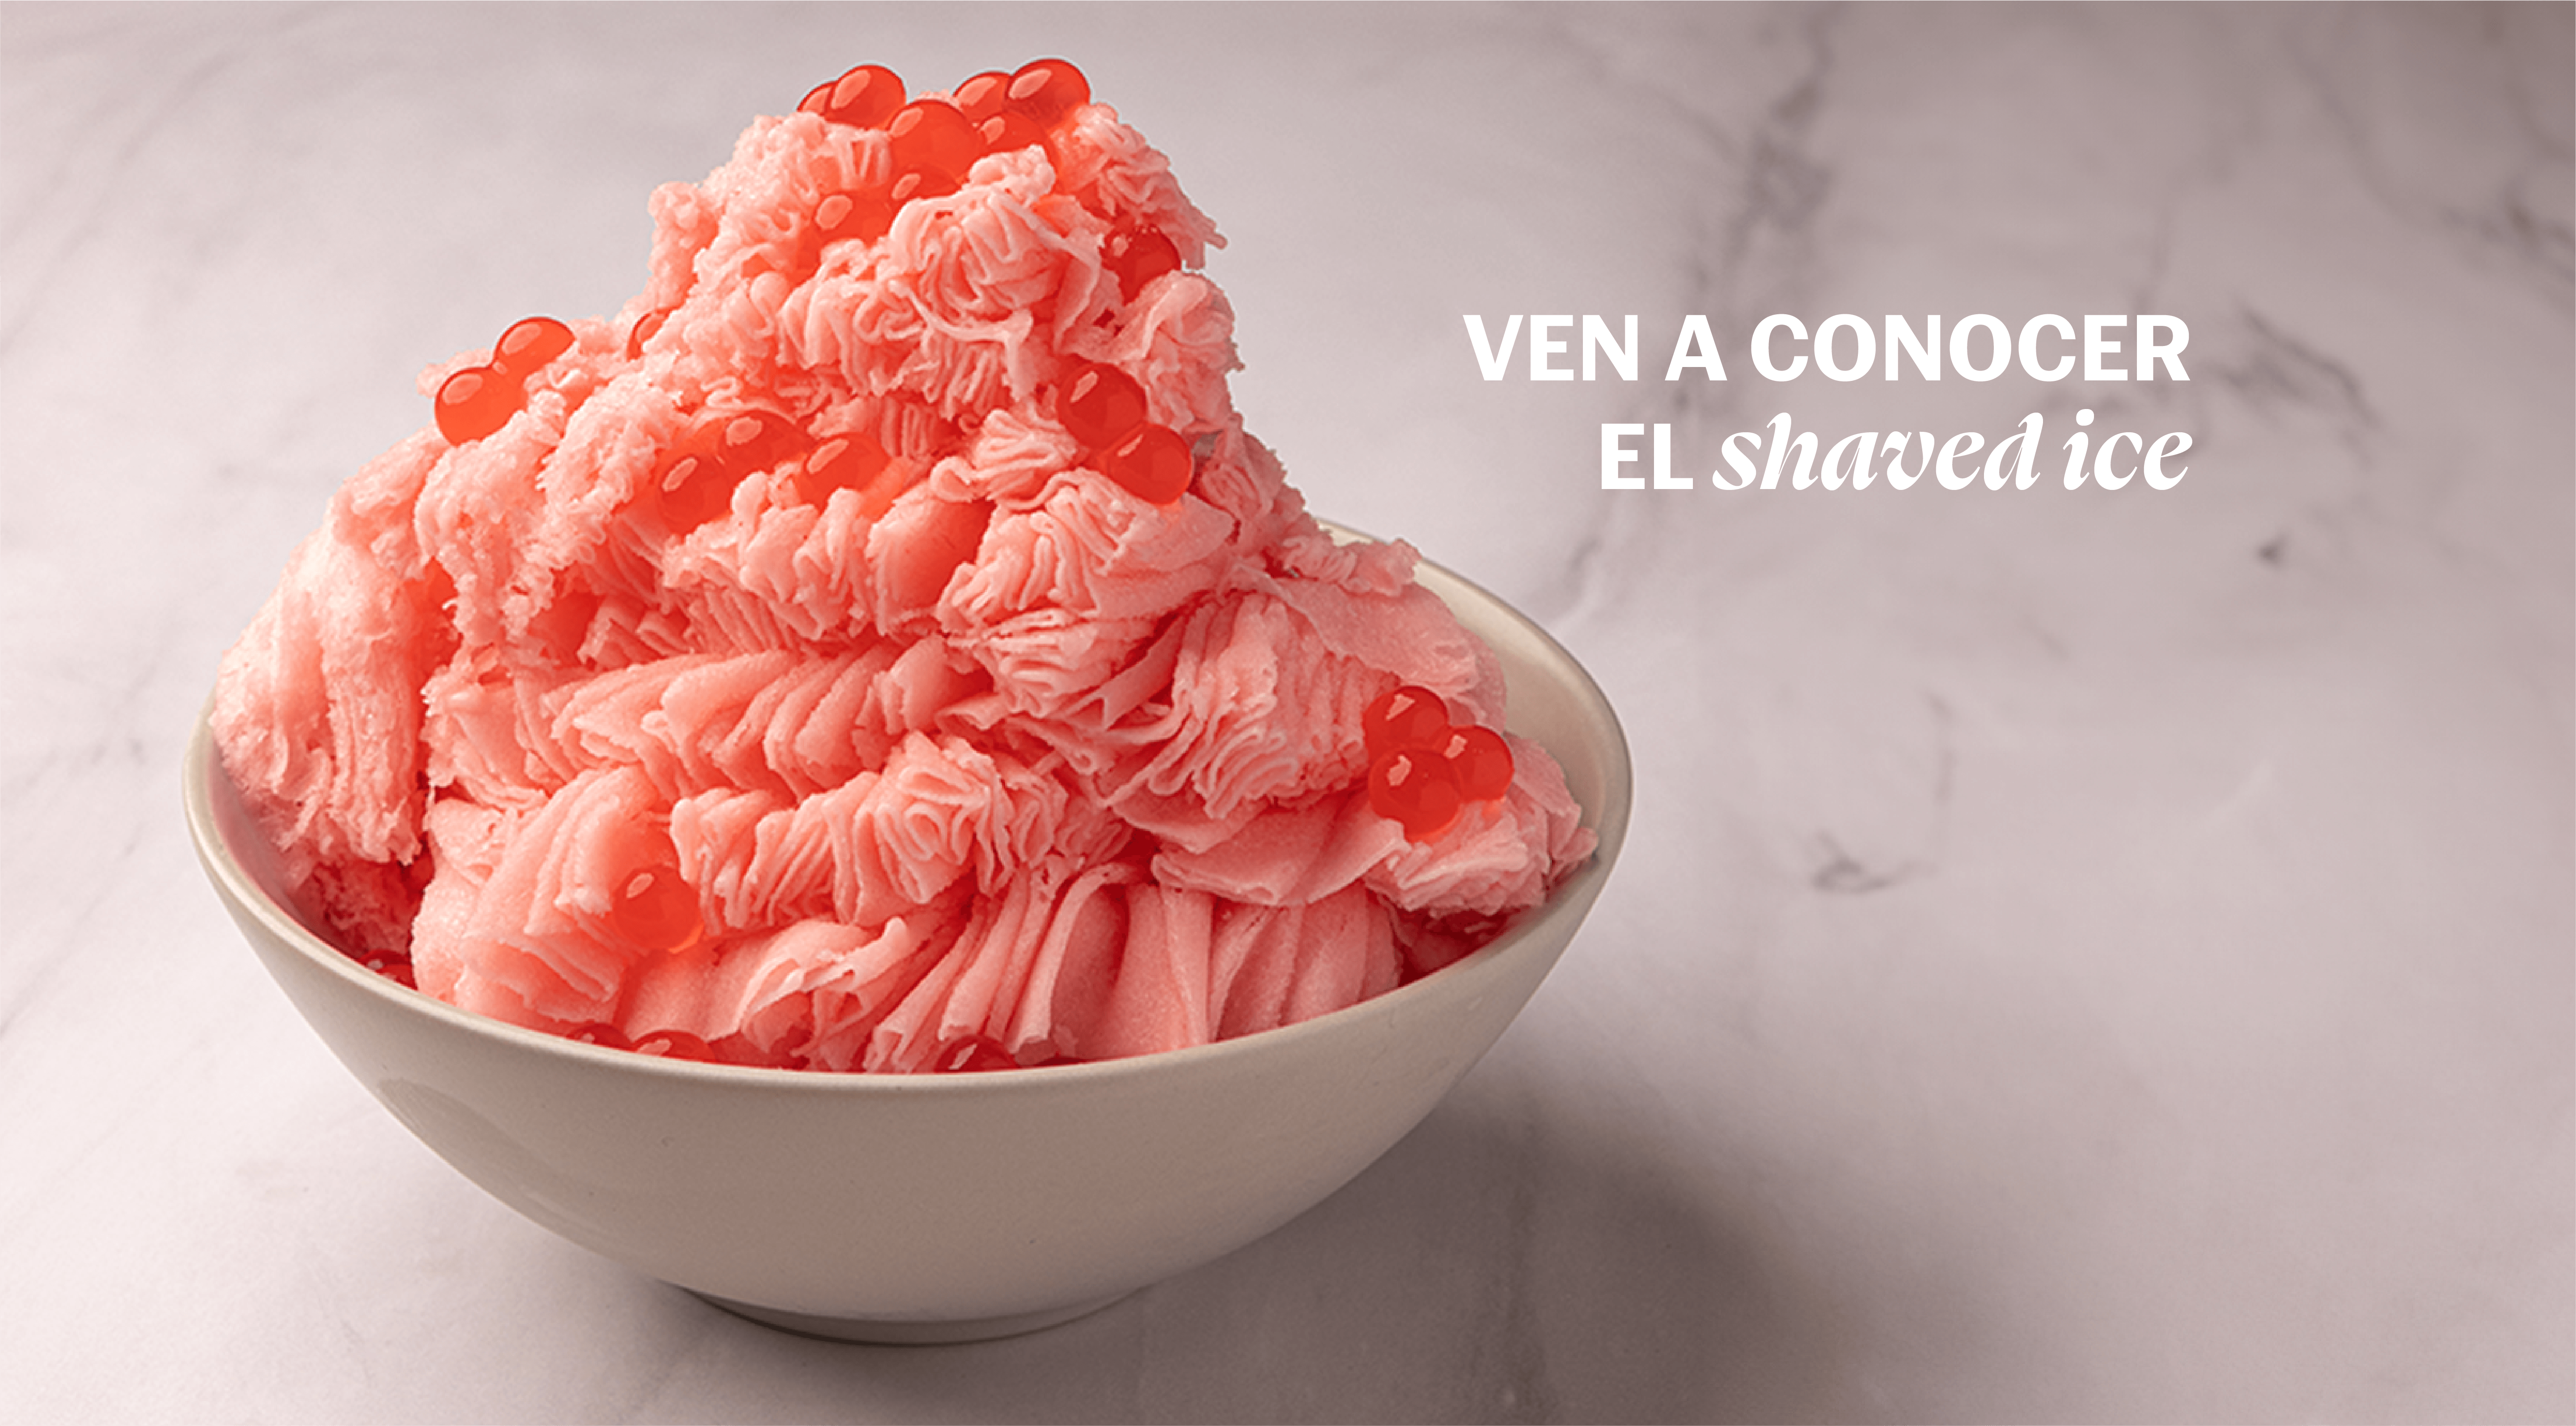 Ven a conocer el shaved ice - one O one Ice & Tea Factory